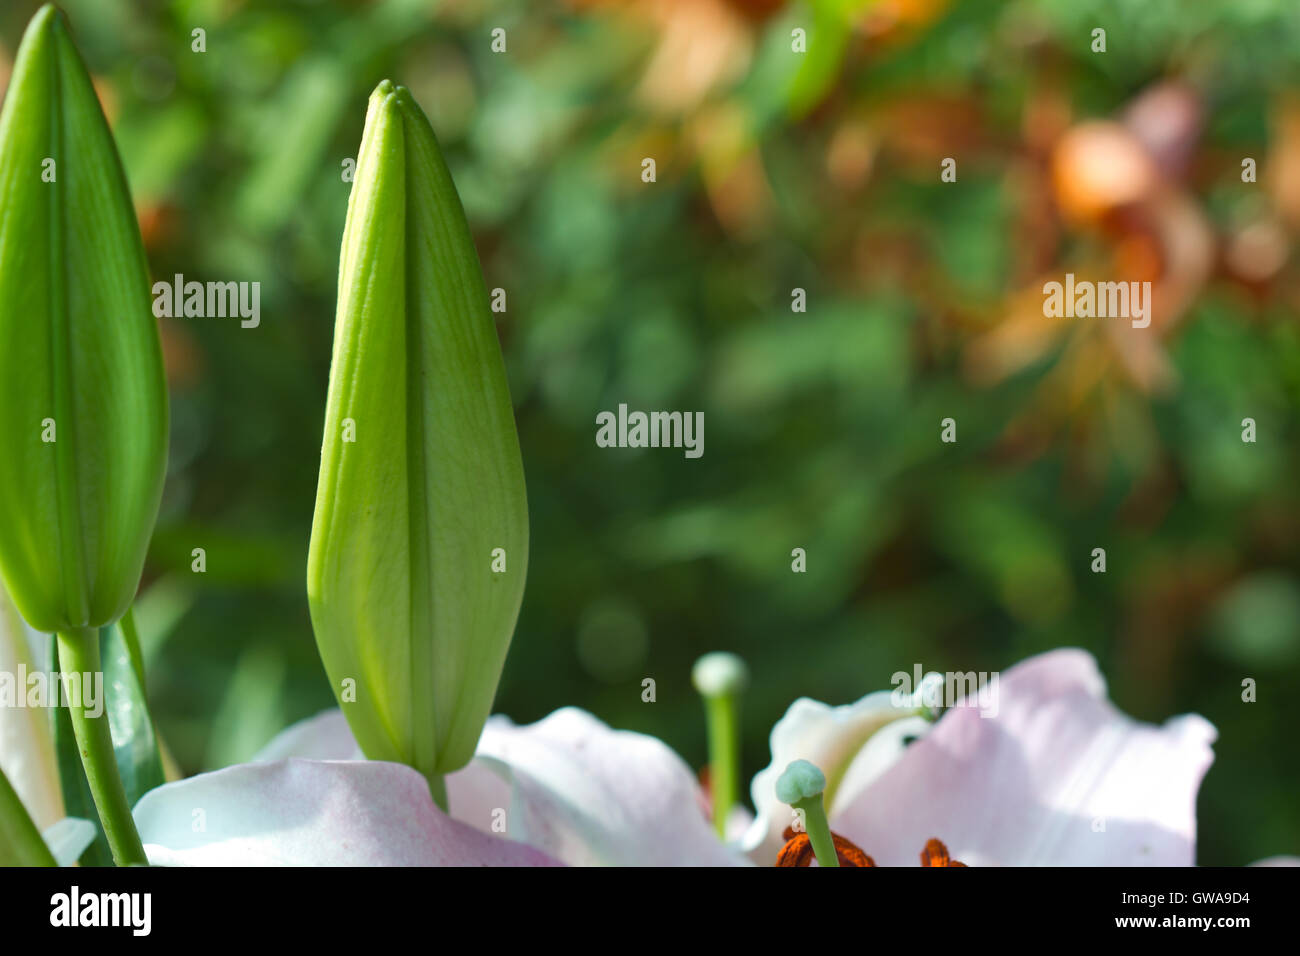 Nature background pattern: petals (pistil stamens) and buds of lily flower closeup Stock Photo